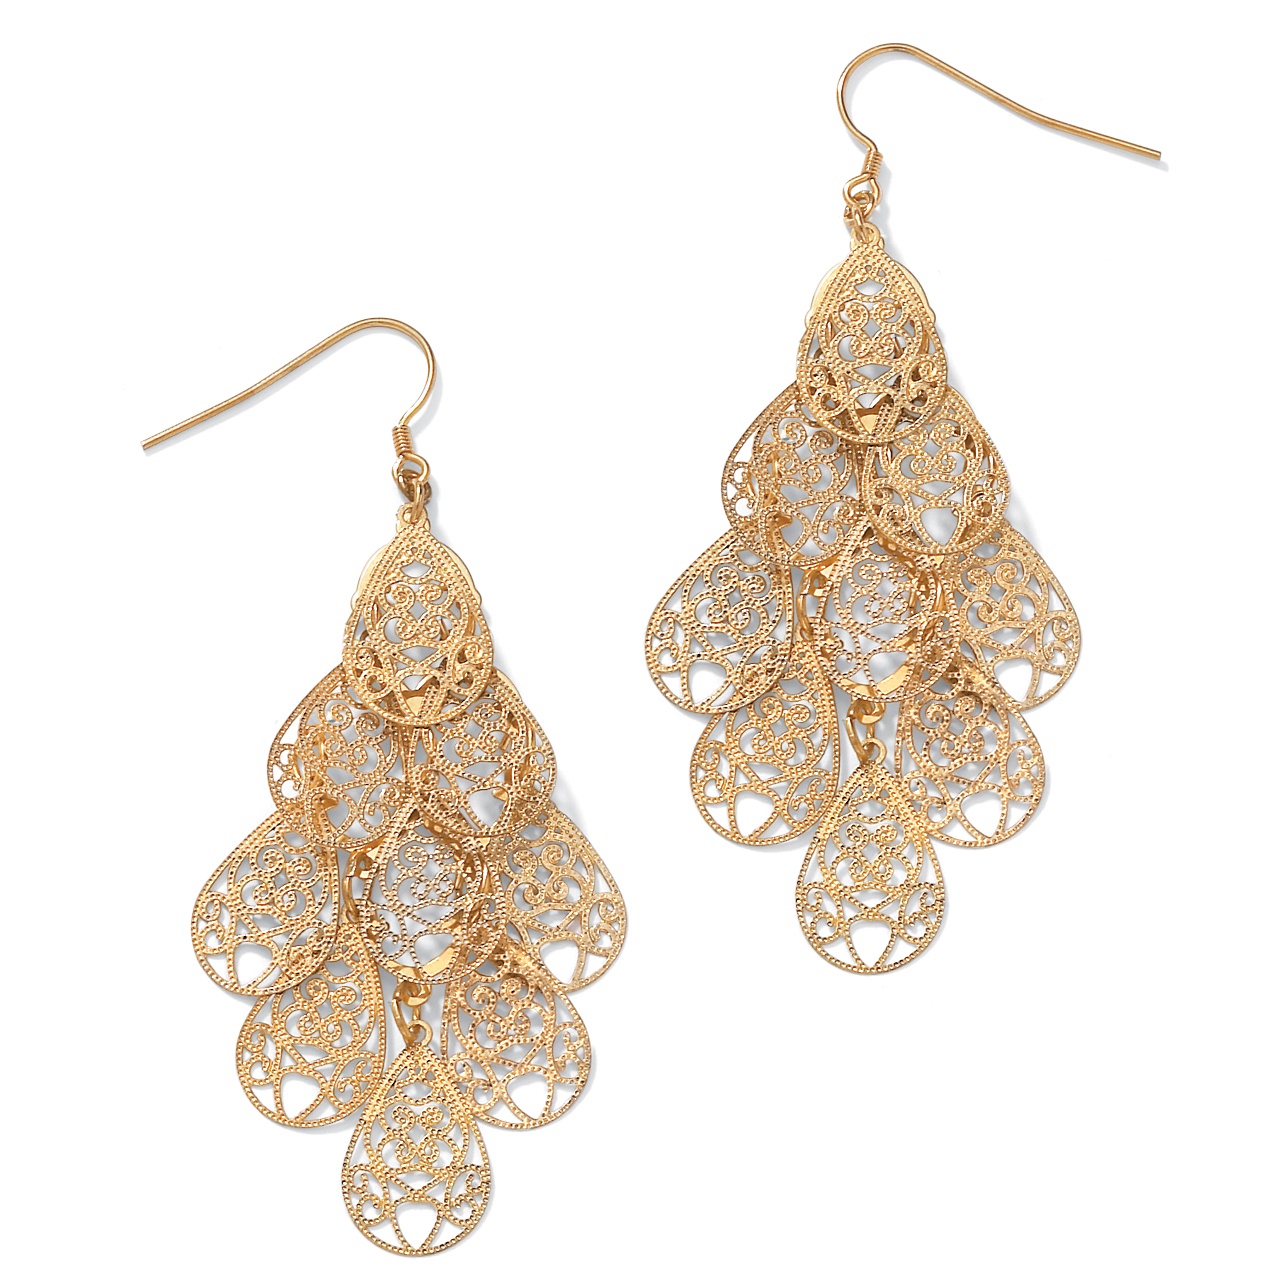 Filigree Chandelier Earrings in Yellow Gold Tone at PalmBeach Jewelry